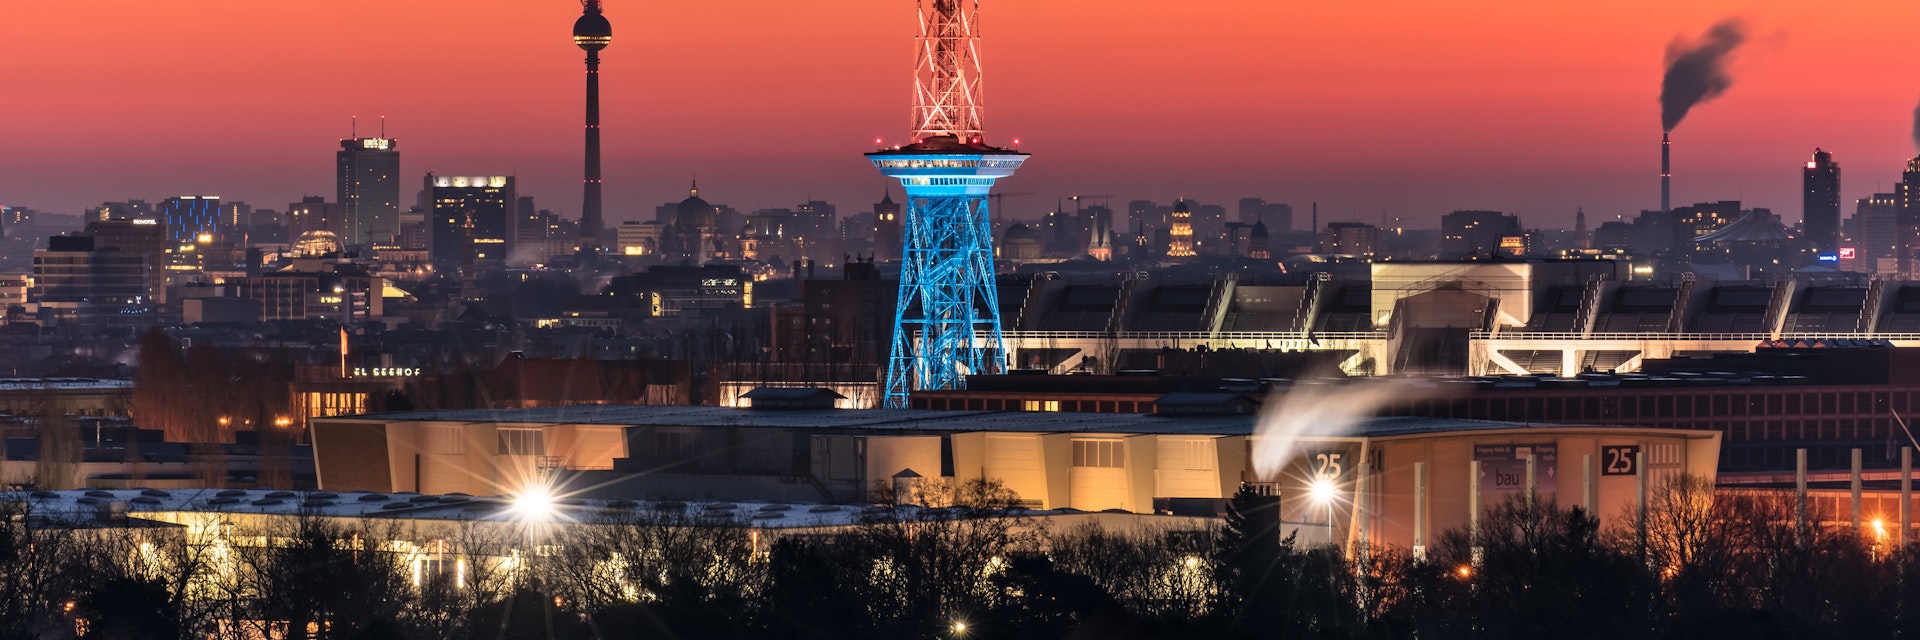 Berlin skyline before sunrise
Cityscape Berlin, Germany, Europe - stock photo

Funkturm is pictured in foreground at center